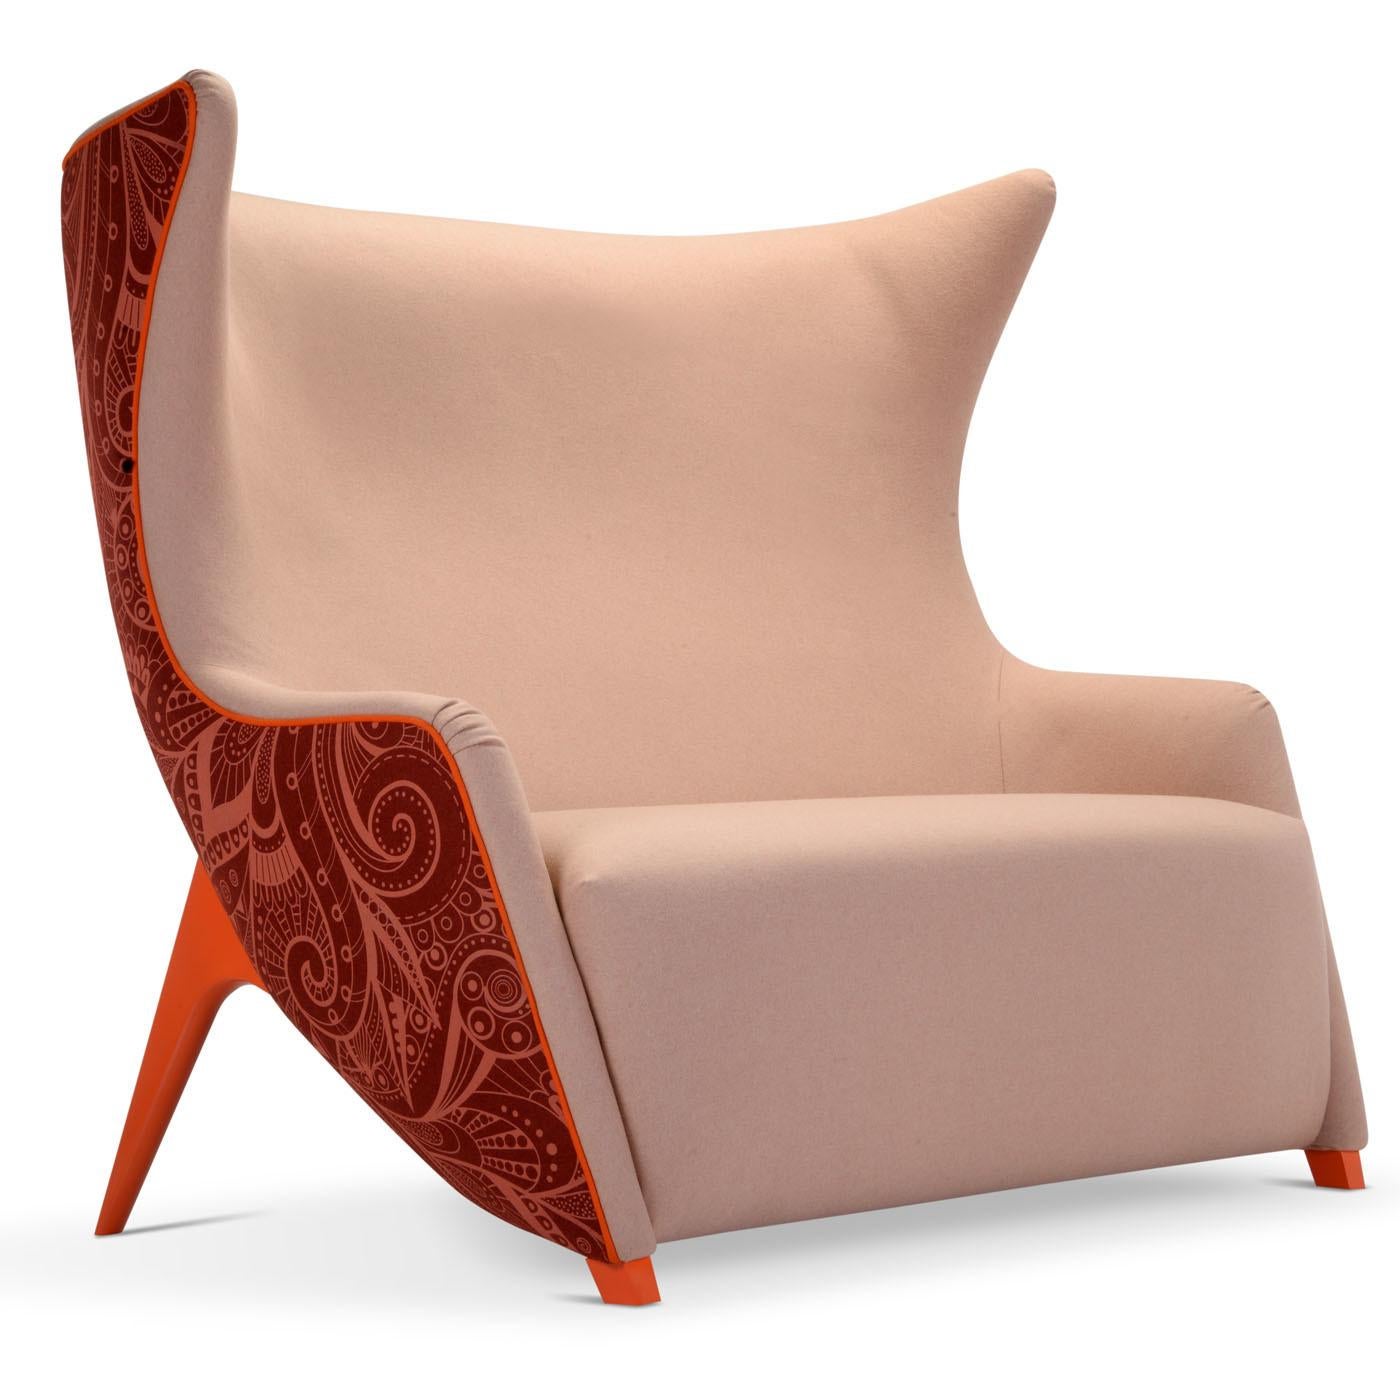 A tribute to Gea della Garisenda and to the wing chairs of the 18th century. The Gea sofa features a slender shape and infinite possibilities for customization. The feet, in painted beech wood, are available in various finishes and the upholstery is